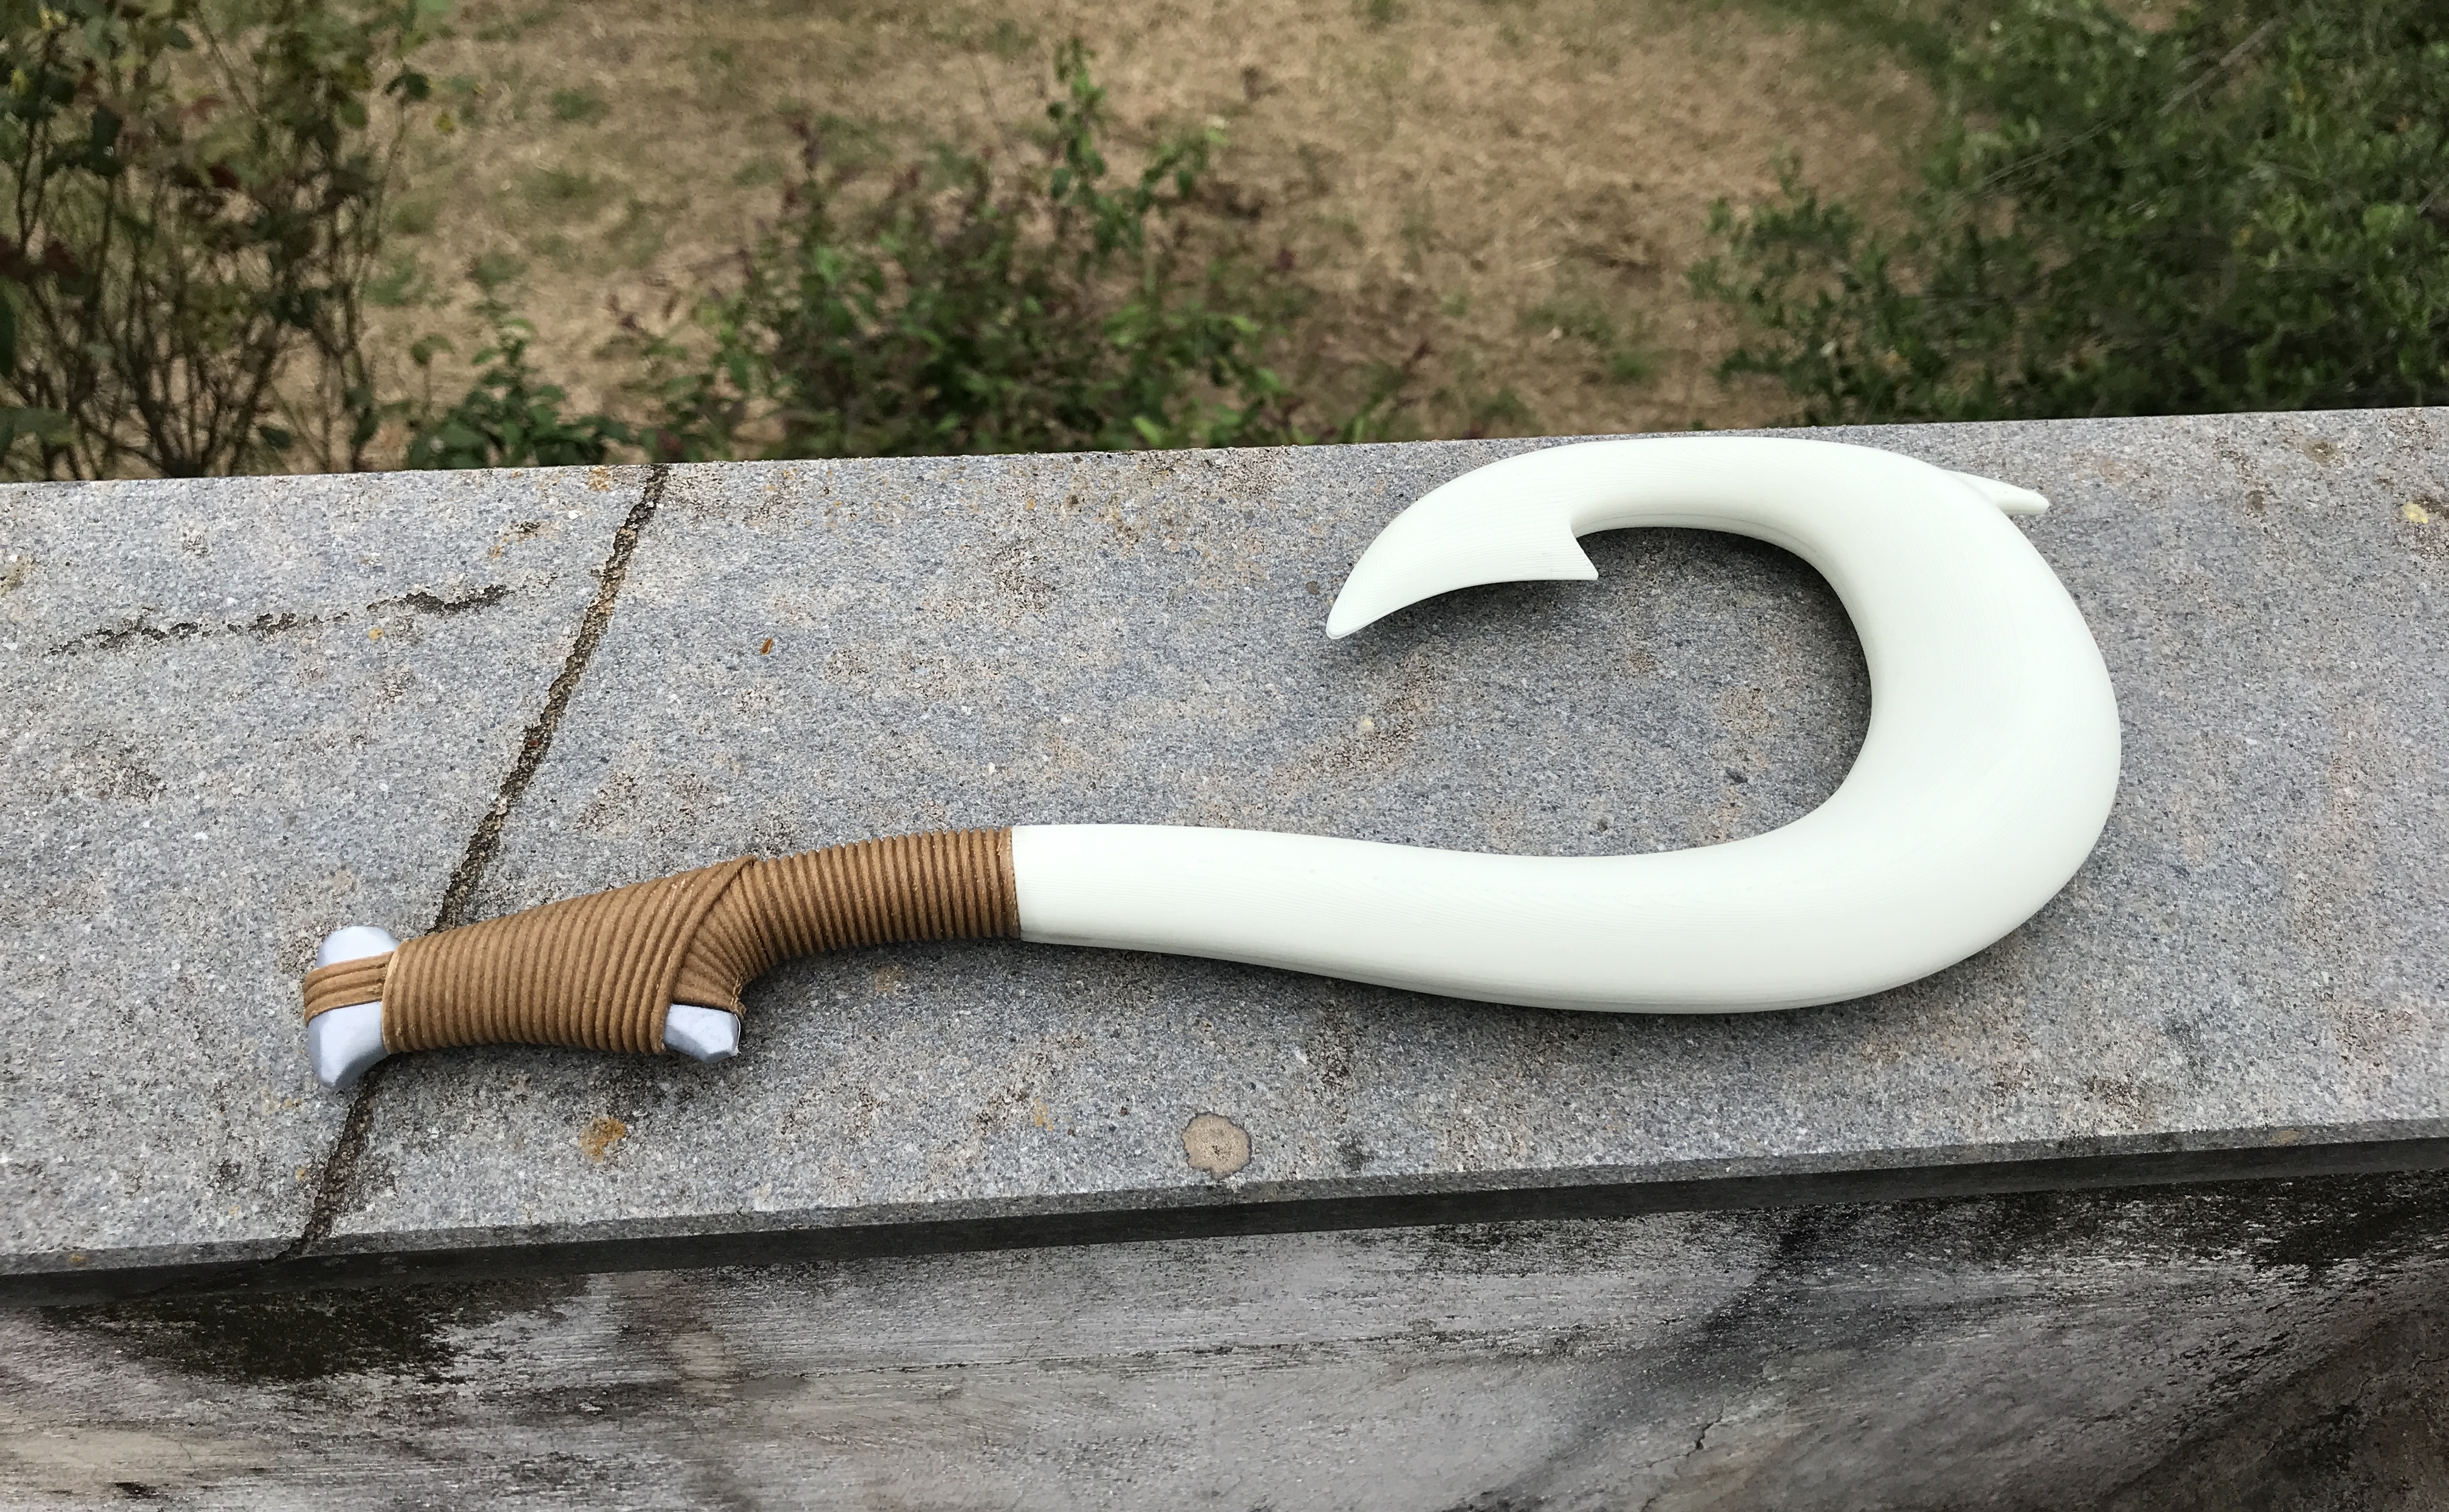 3D Printable Maui's magical fish hook from the movie Moana by